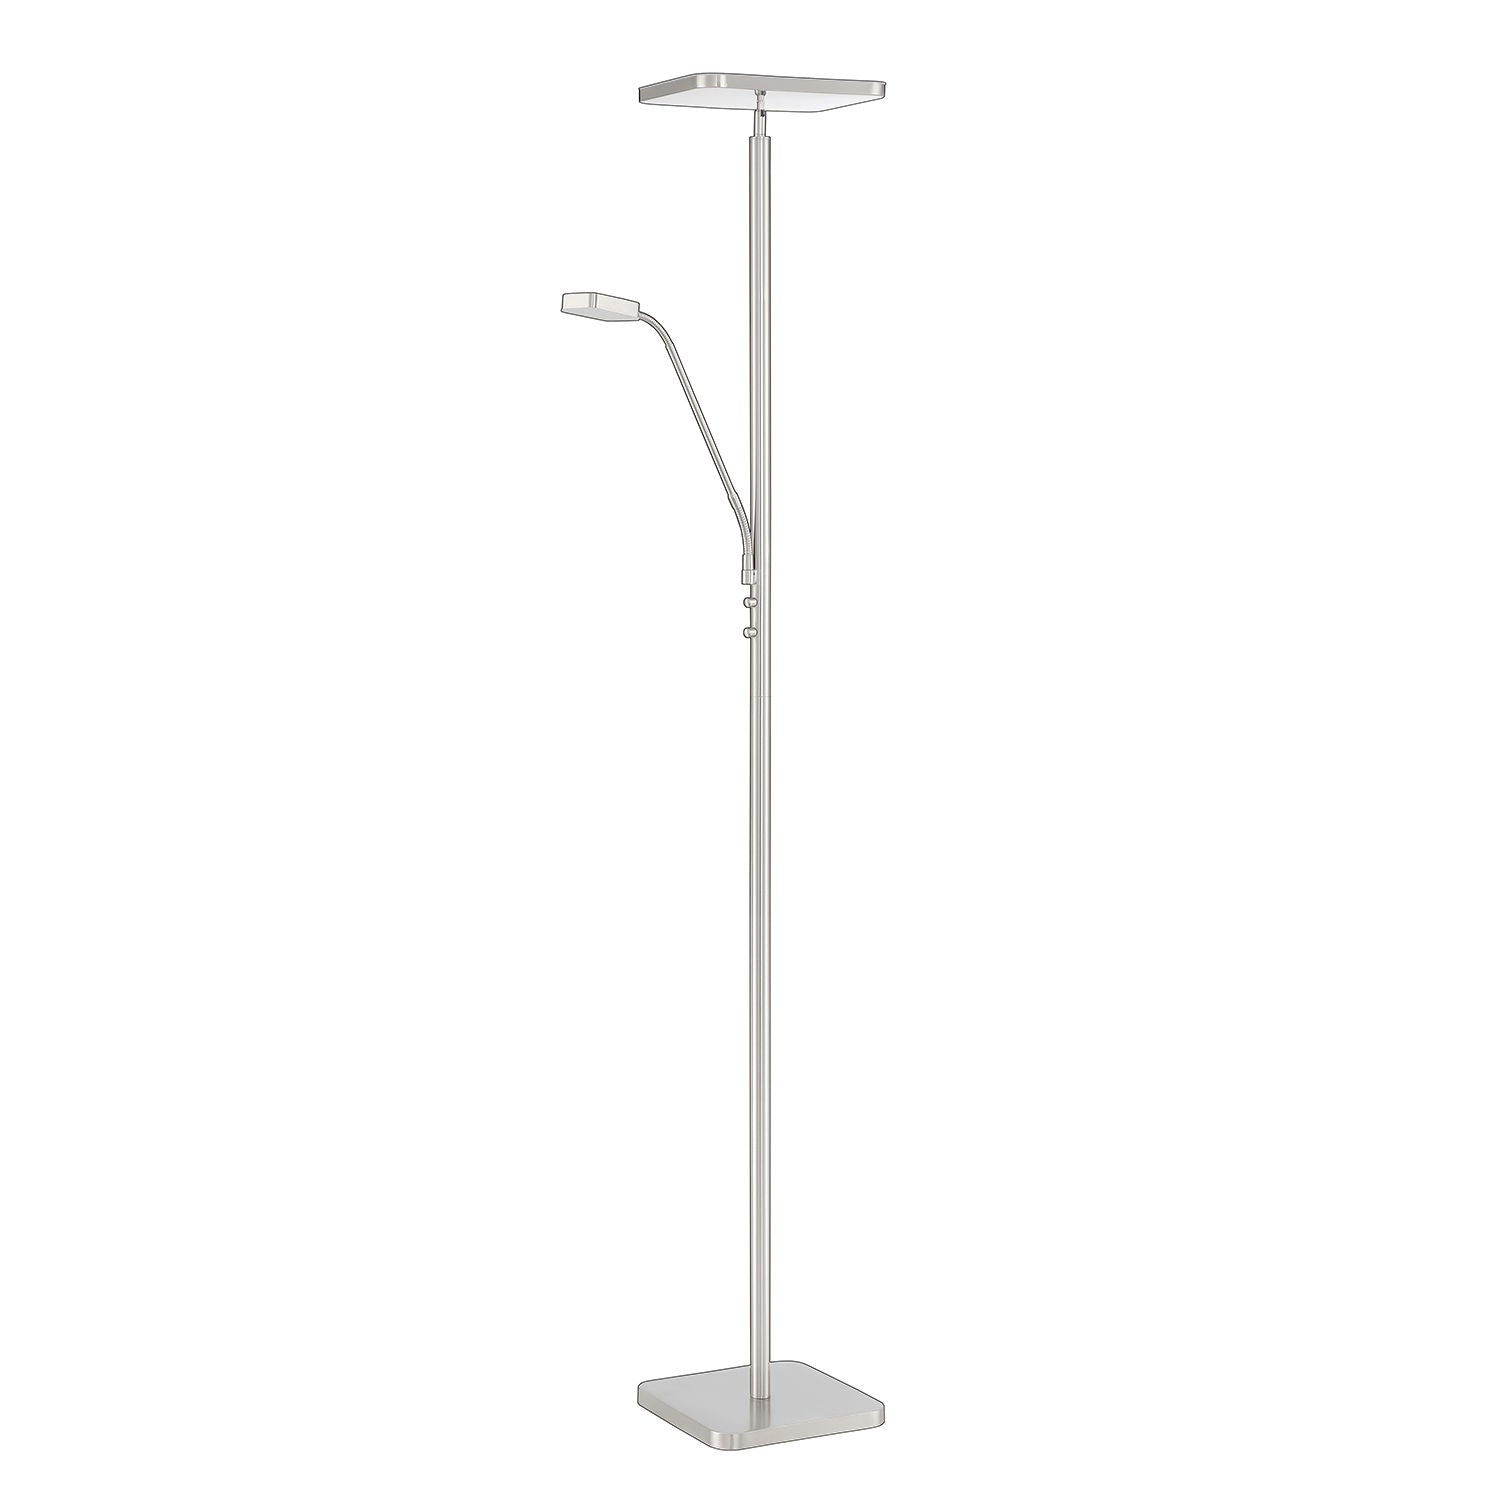 Floor lamp Stainless steel INTEGRATED LED - TC5012-SN | KENDAL